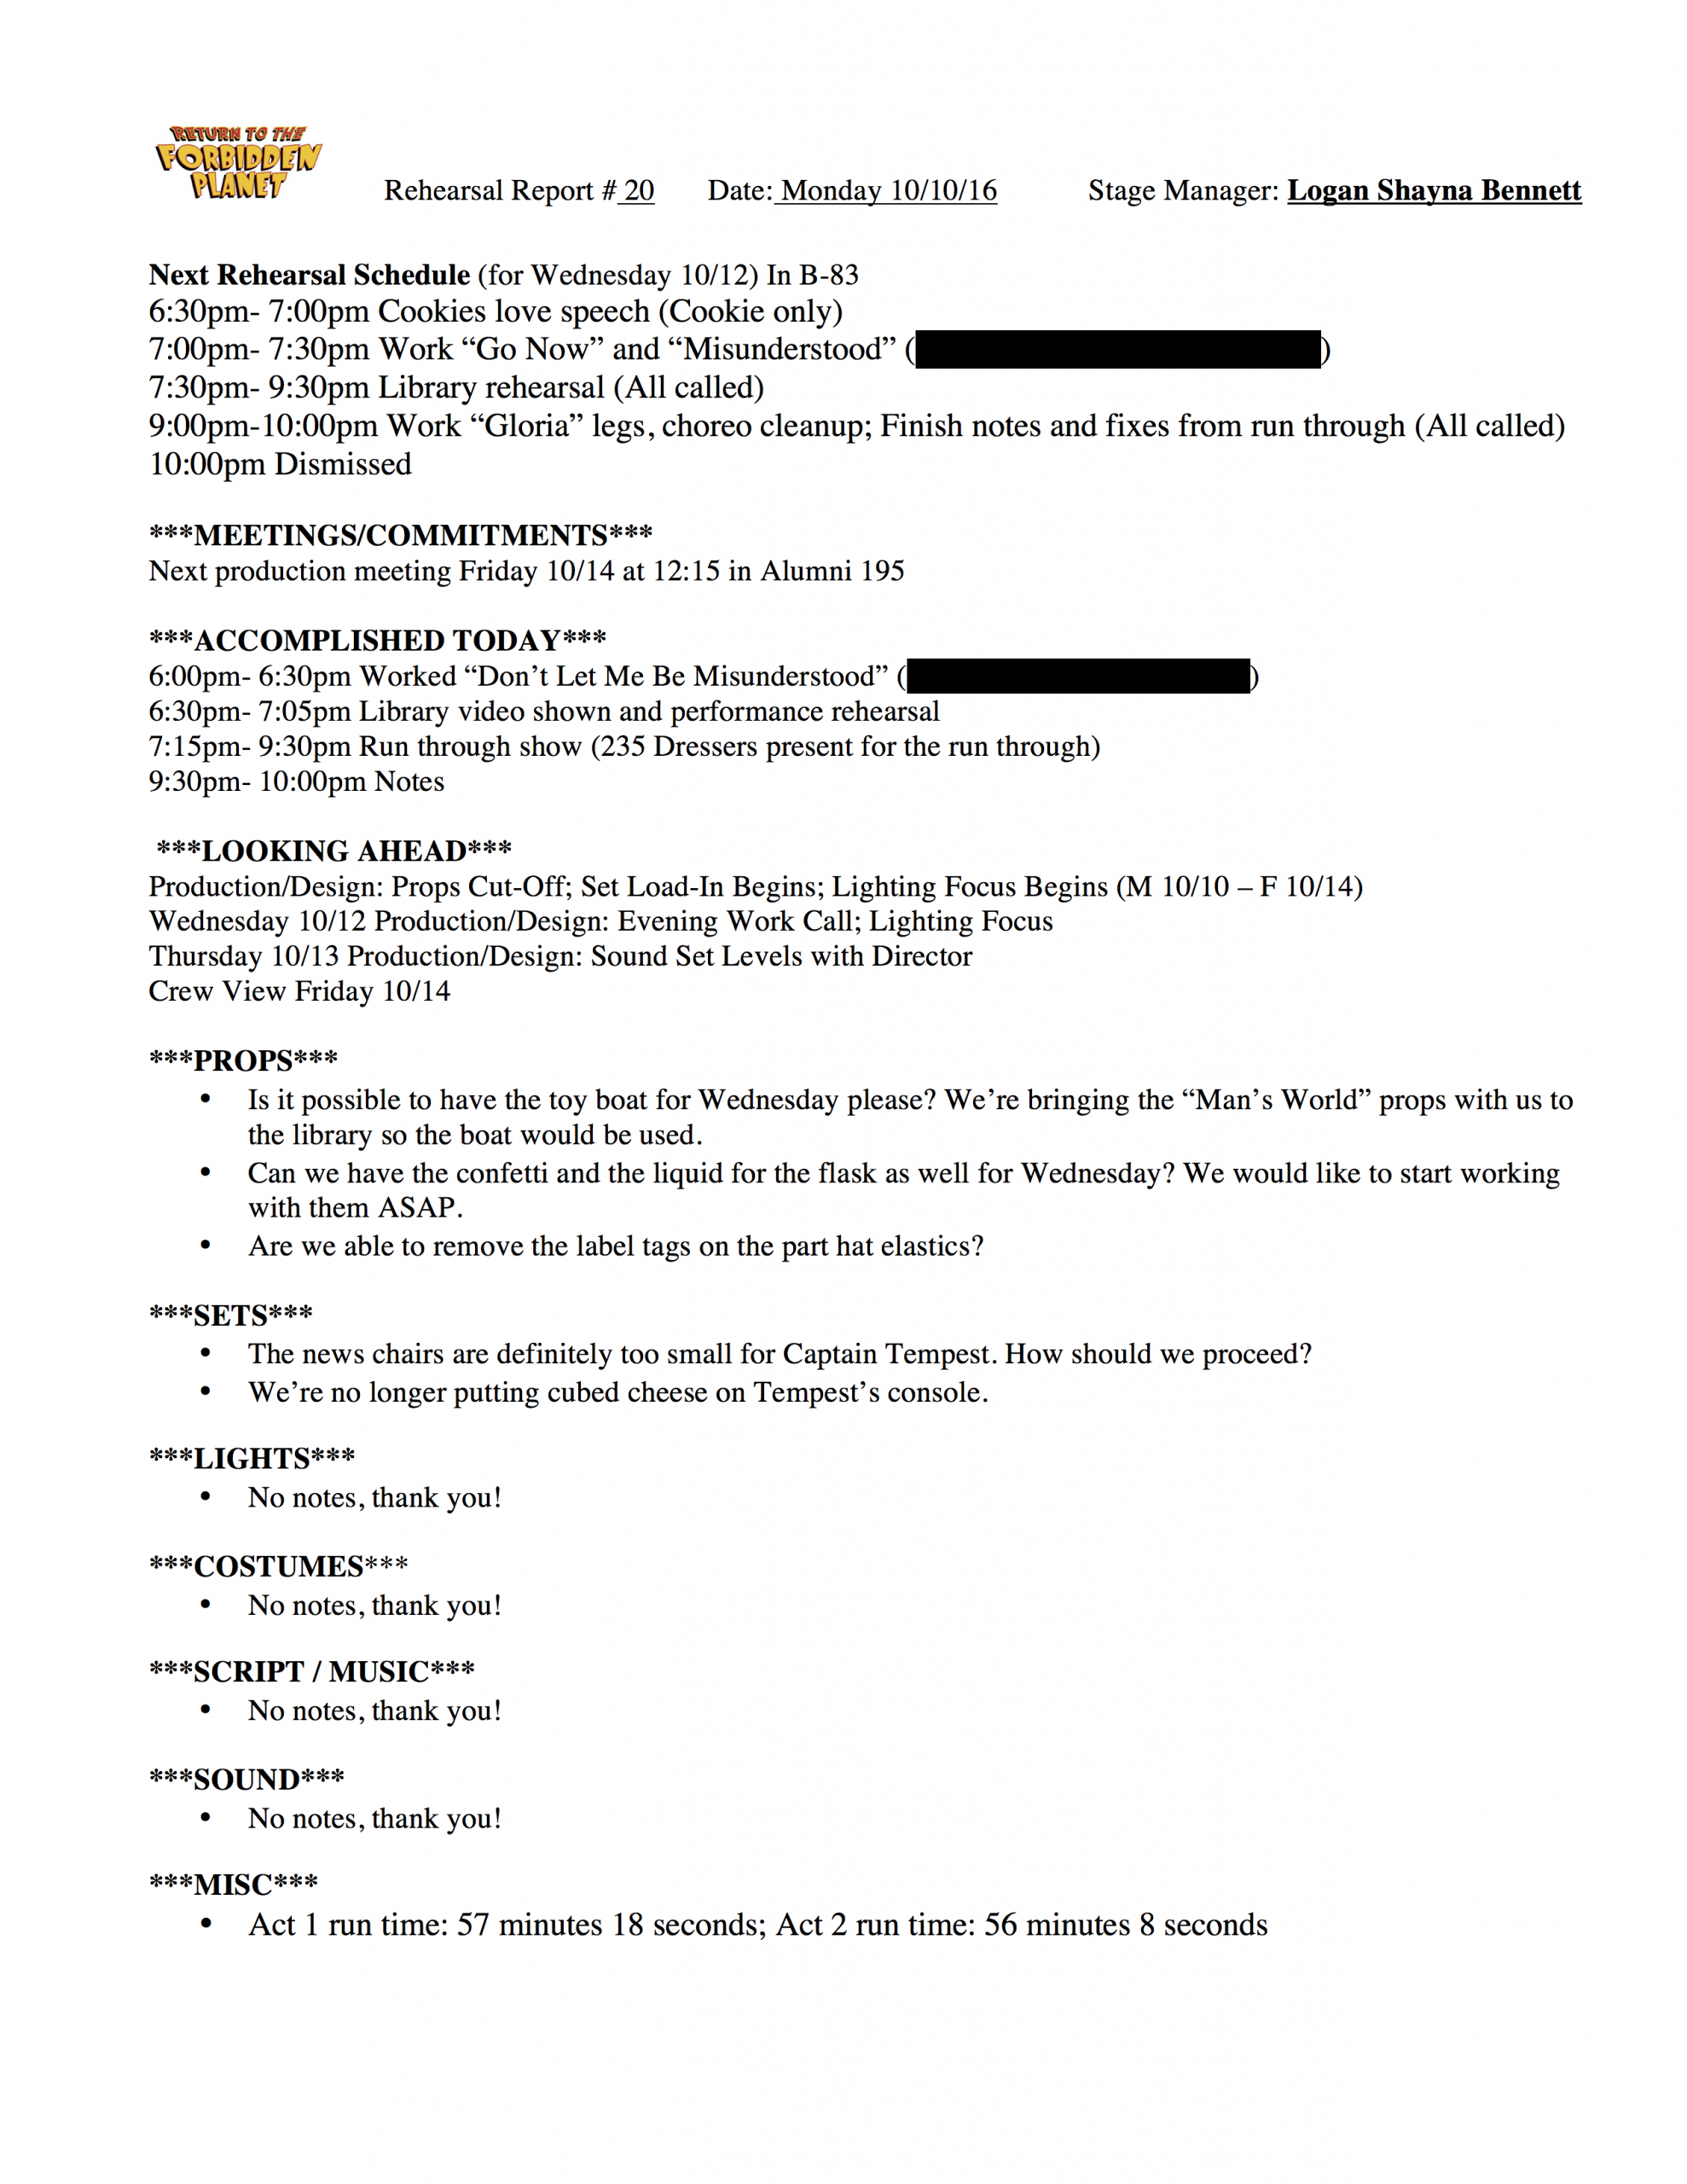 Rehearsal Report Template Stage Manager Theatre Pdf E Es Fp For Rehearsal Report Template